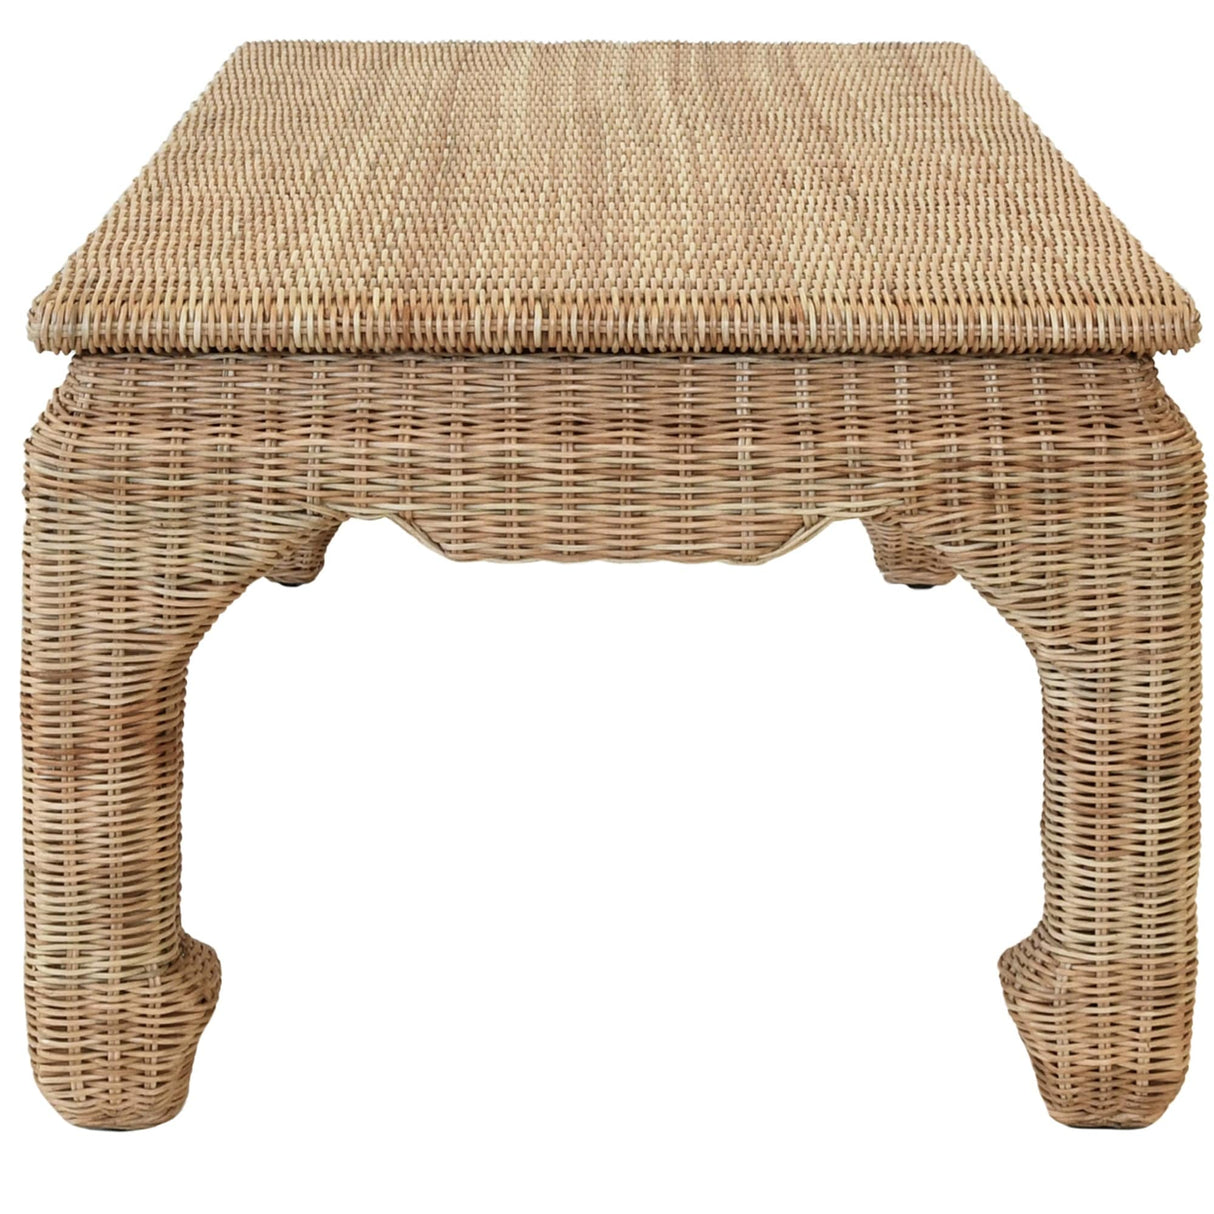 Worlds Away Guinevere Coffee Table Coffee Tables worlds-away-GUINEVERE 607629035941